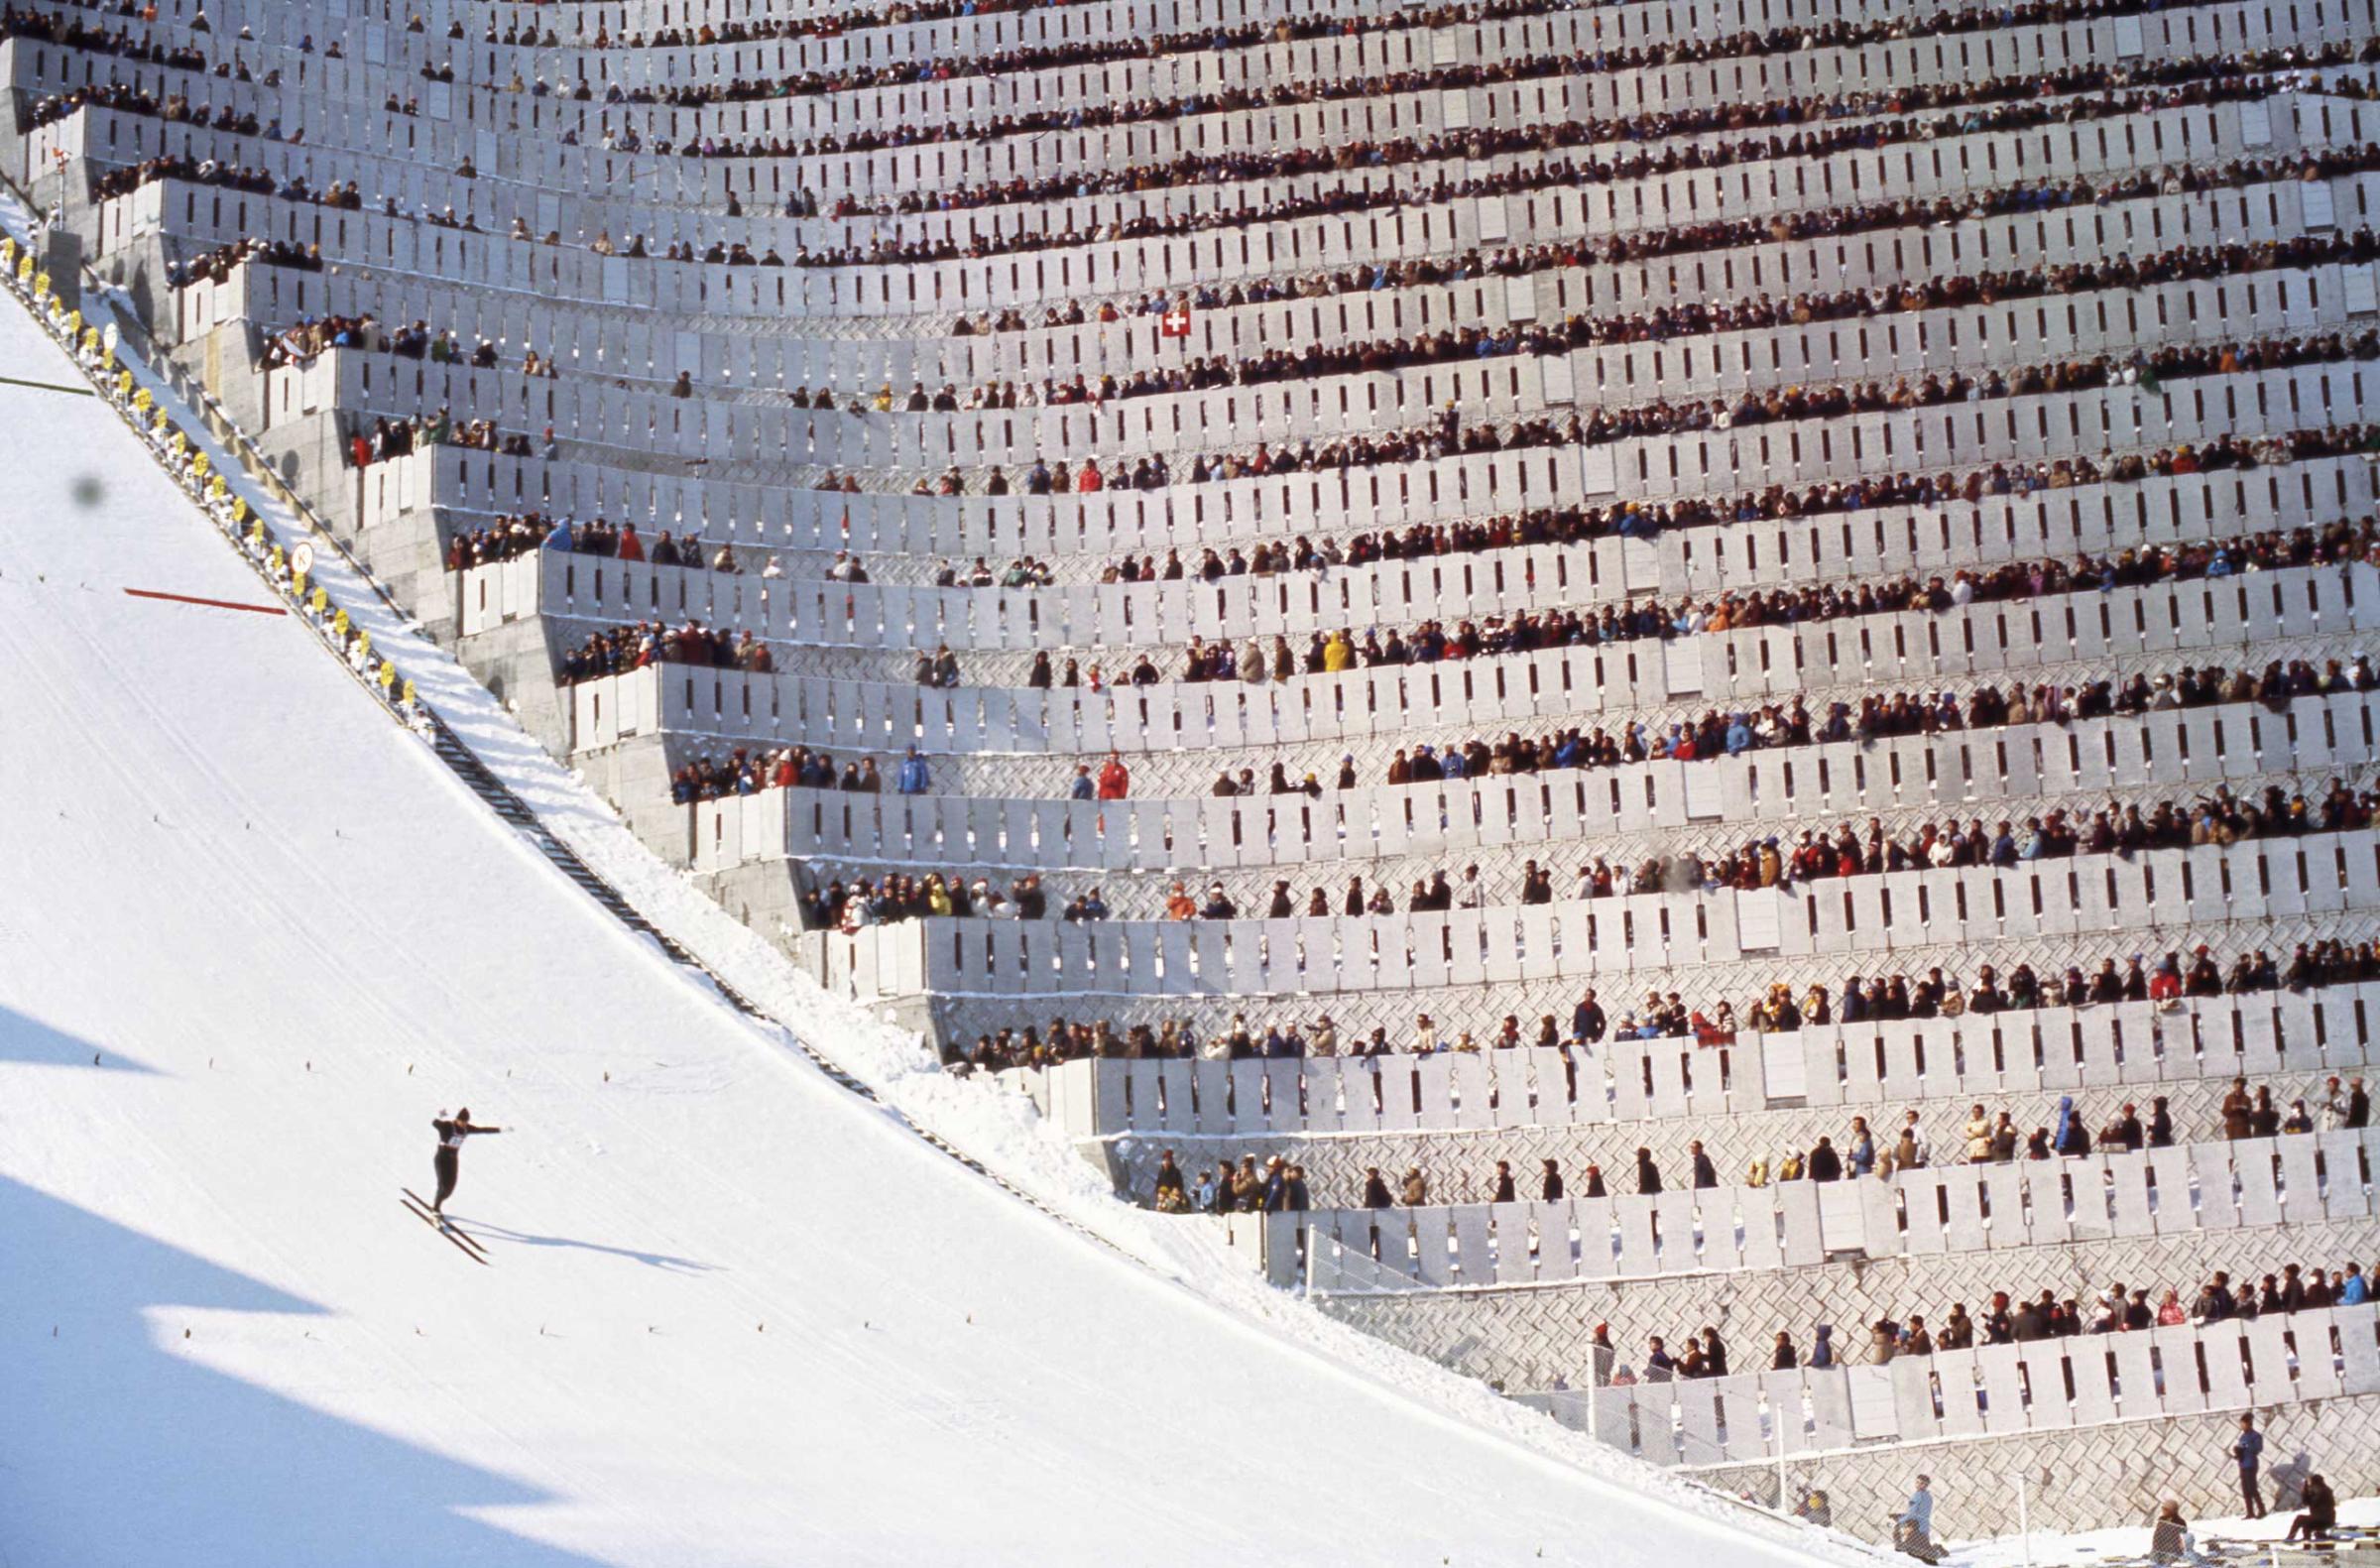 The 90-meter ski jump at the 1972 Olympics in Japan.